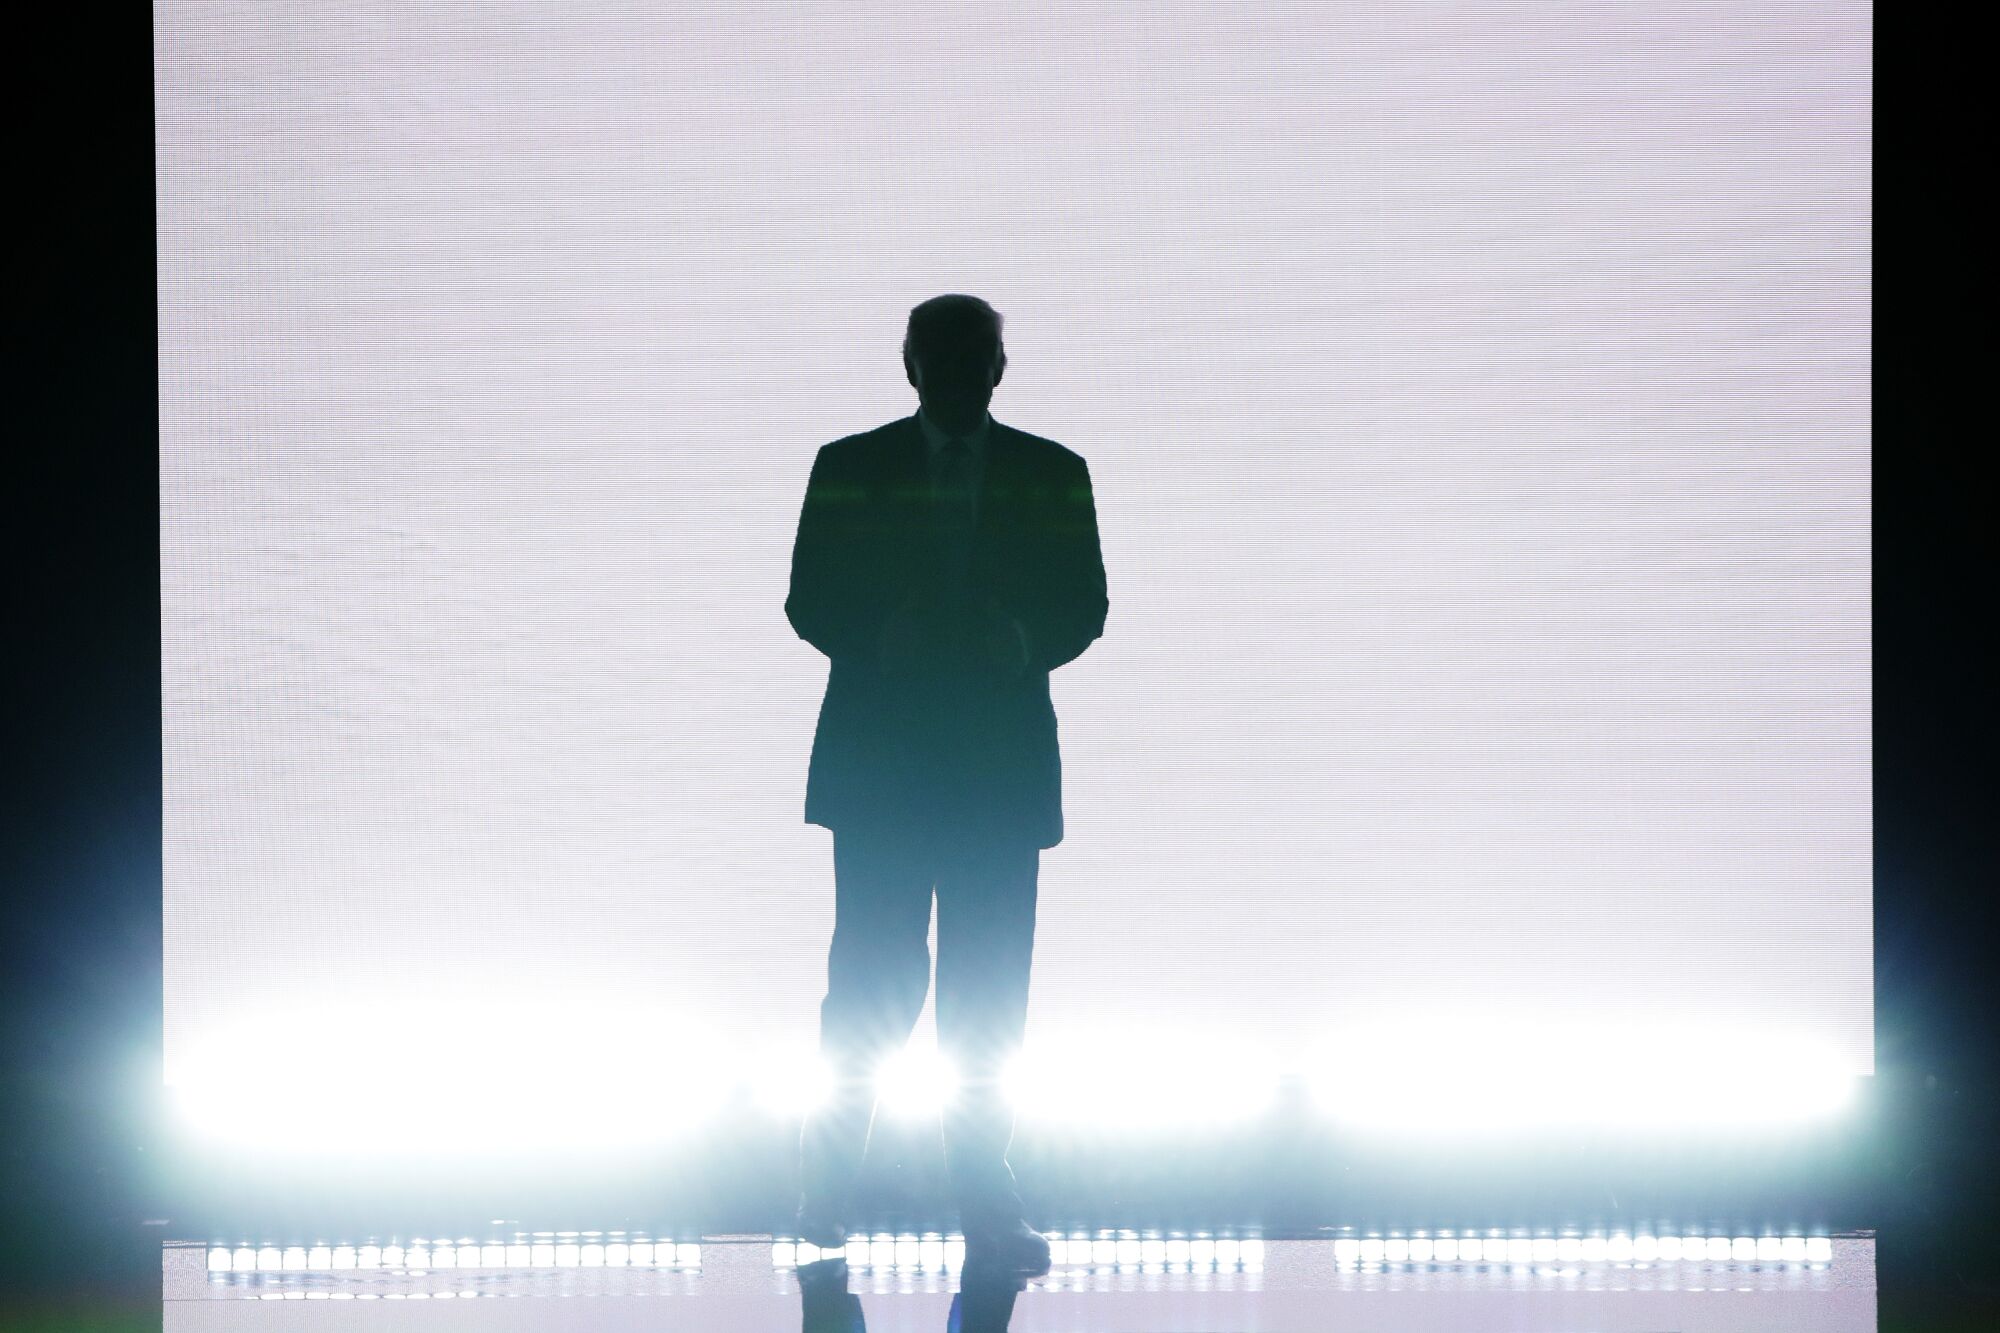 Donald Trump is lighted from behind with a blank screen behind him while walking on a stage.